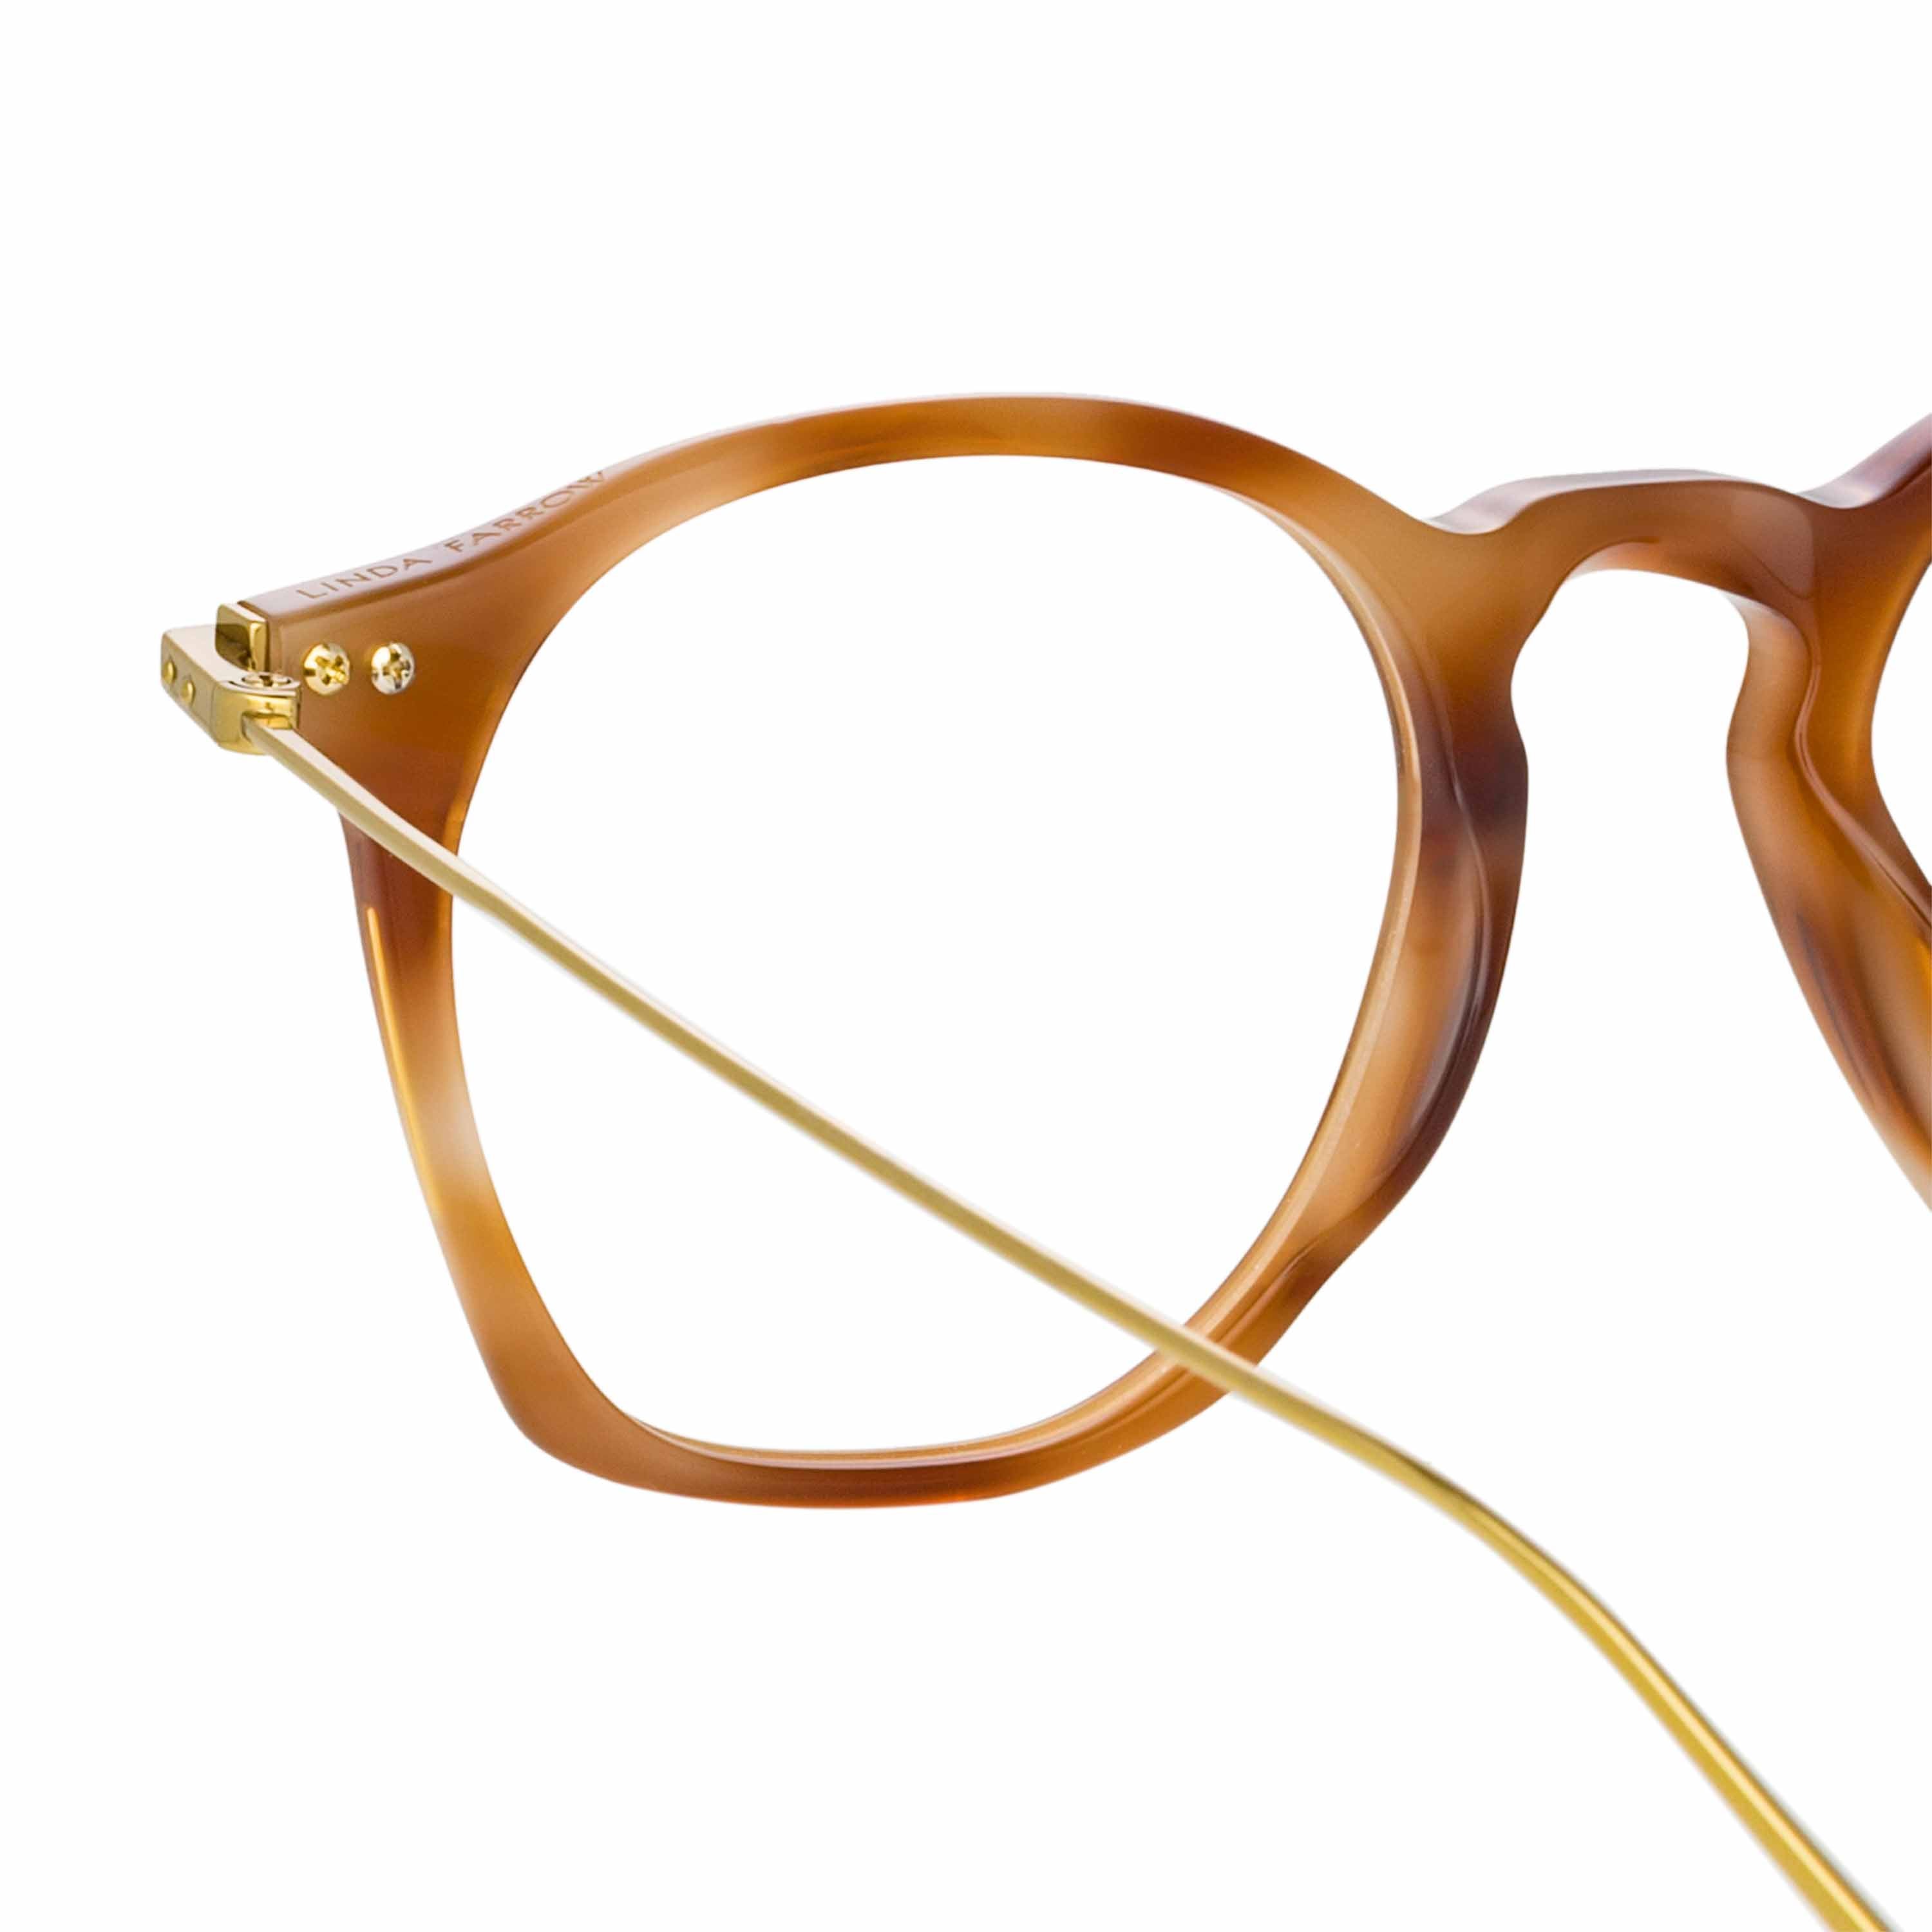 Color_LF52C4OPT - Mila Square Optical Frame in Brown